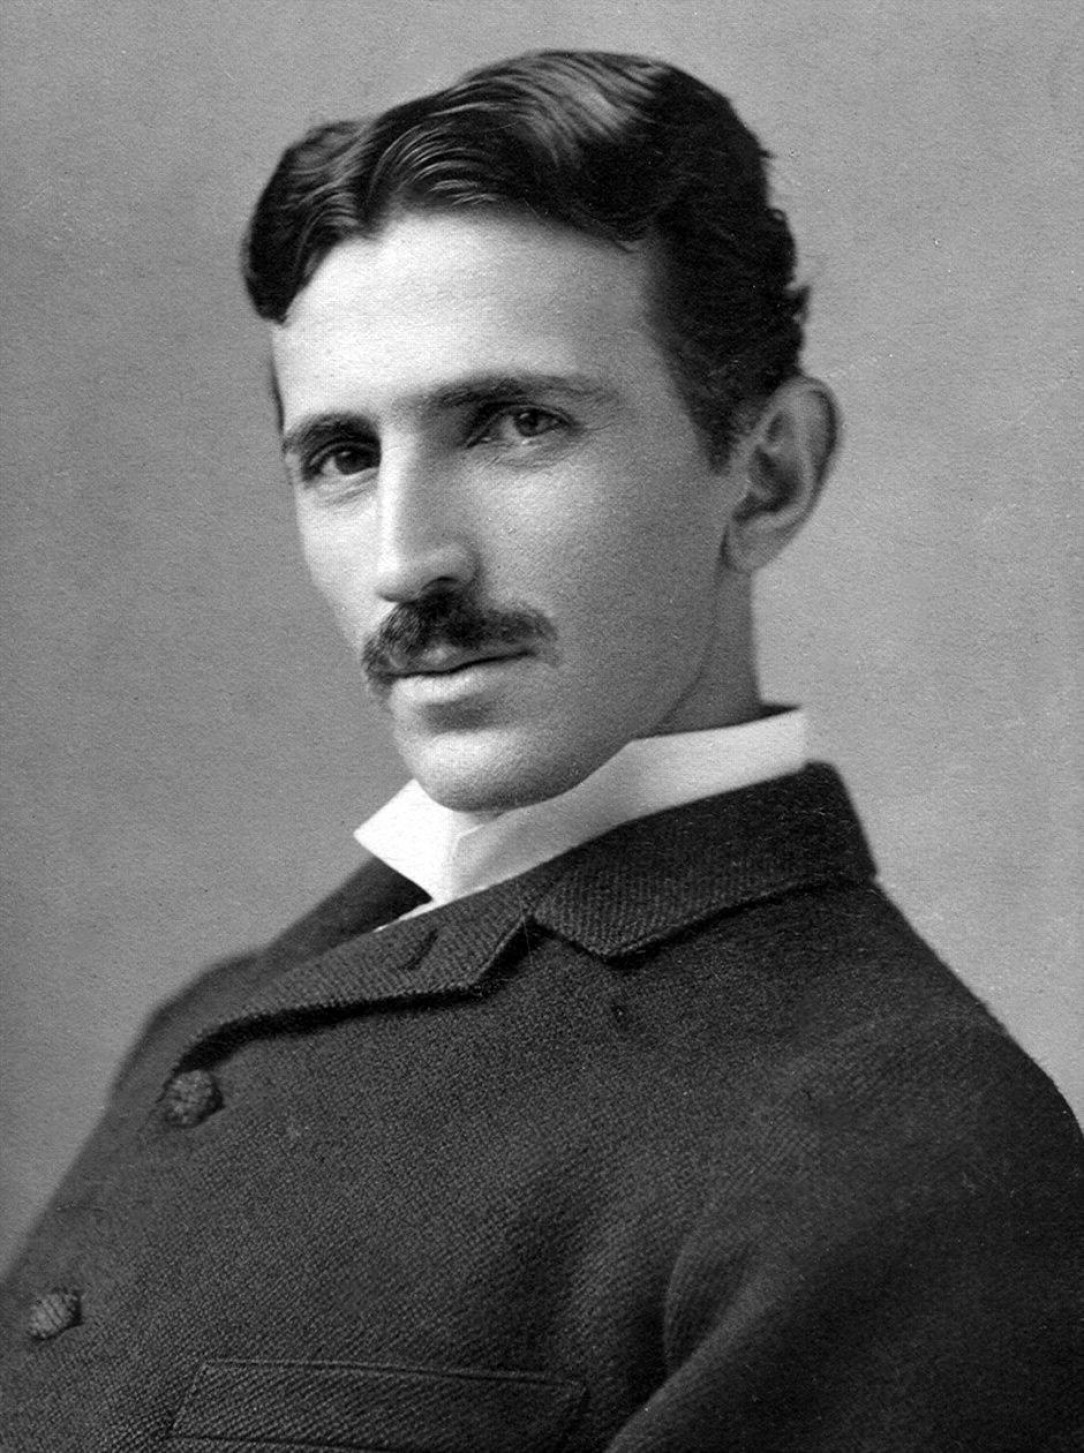 Today marks 80 years since the death of Nikola Tesla, a Serbian-American inventor, engineer and futurist